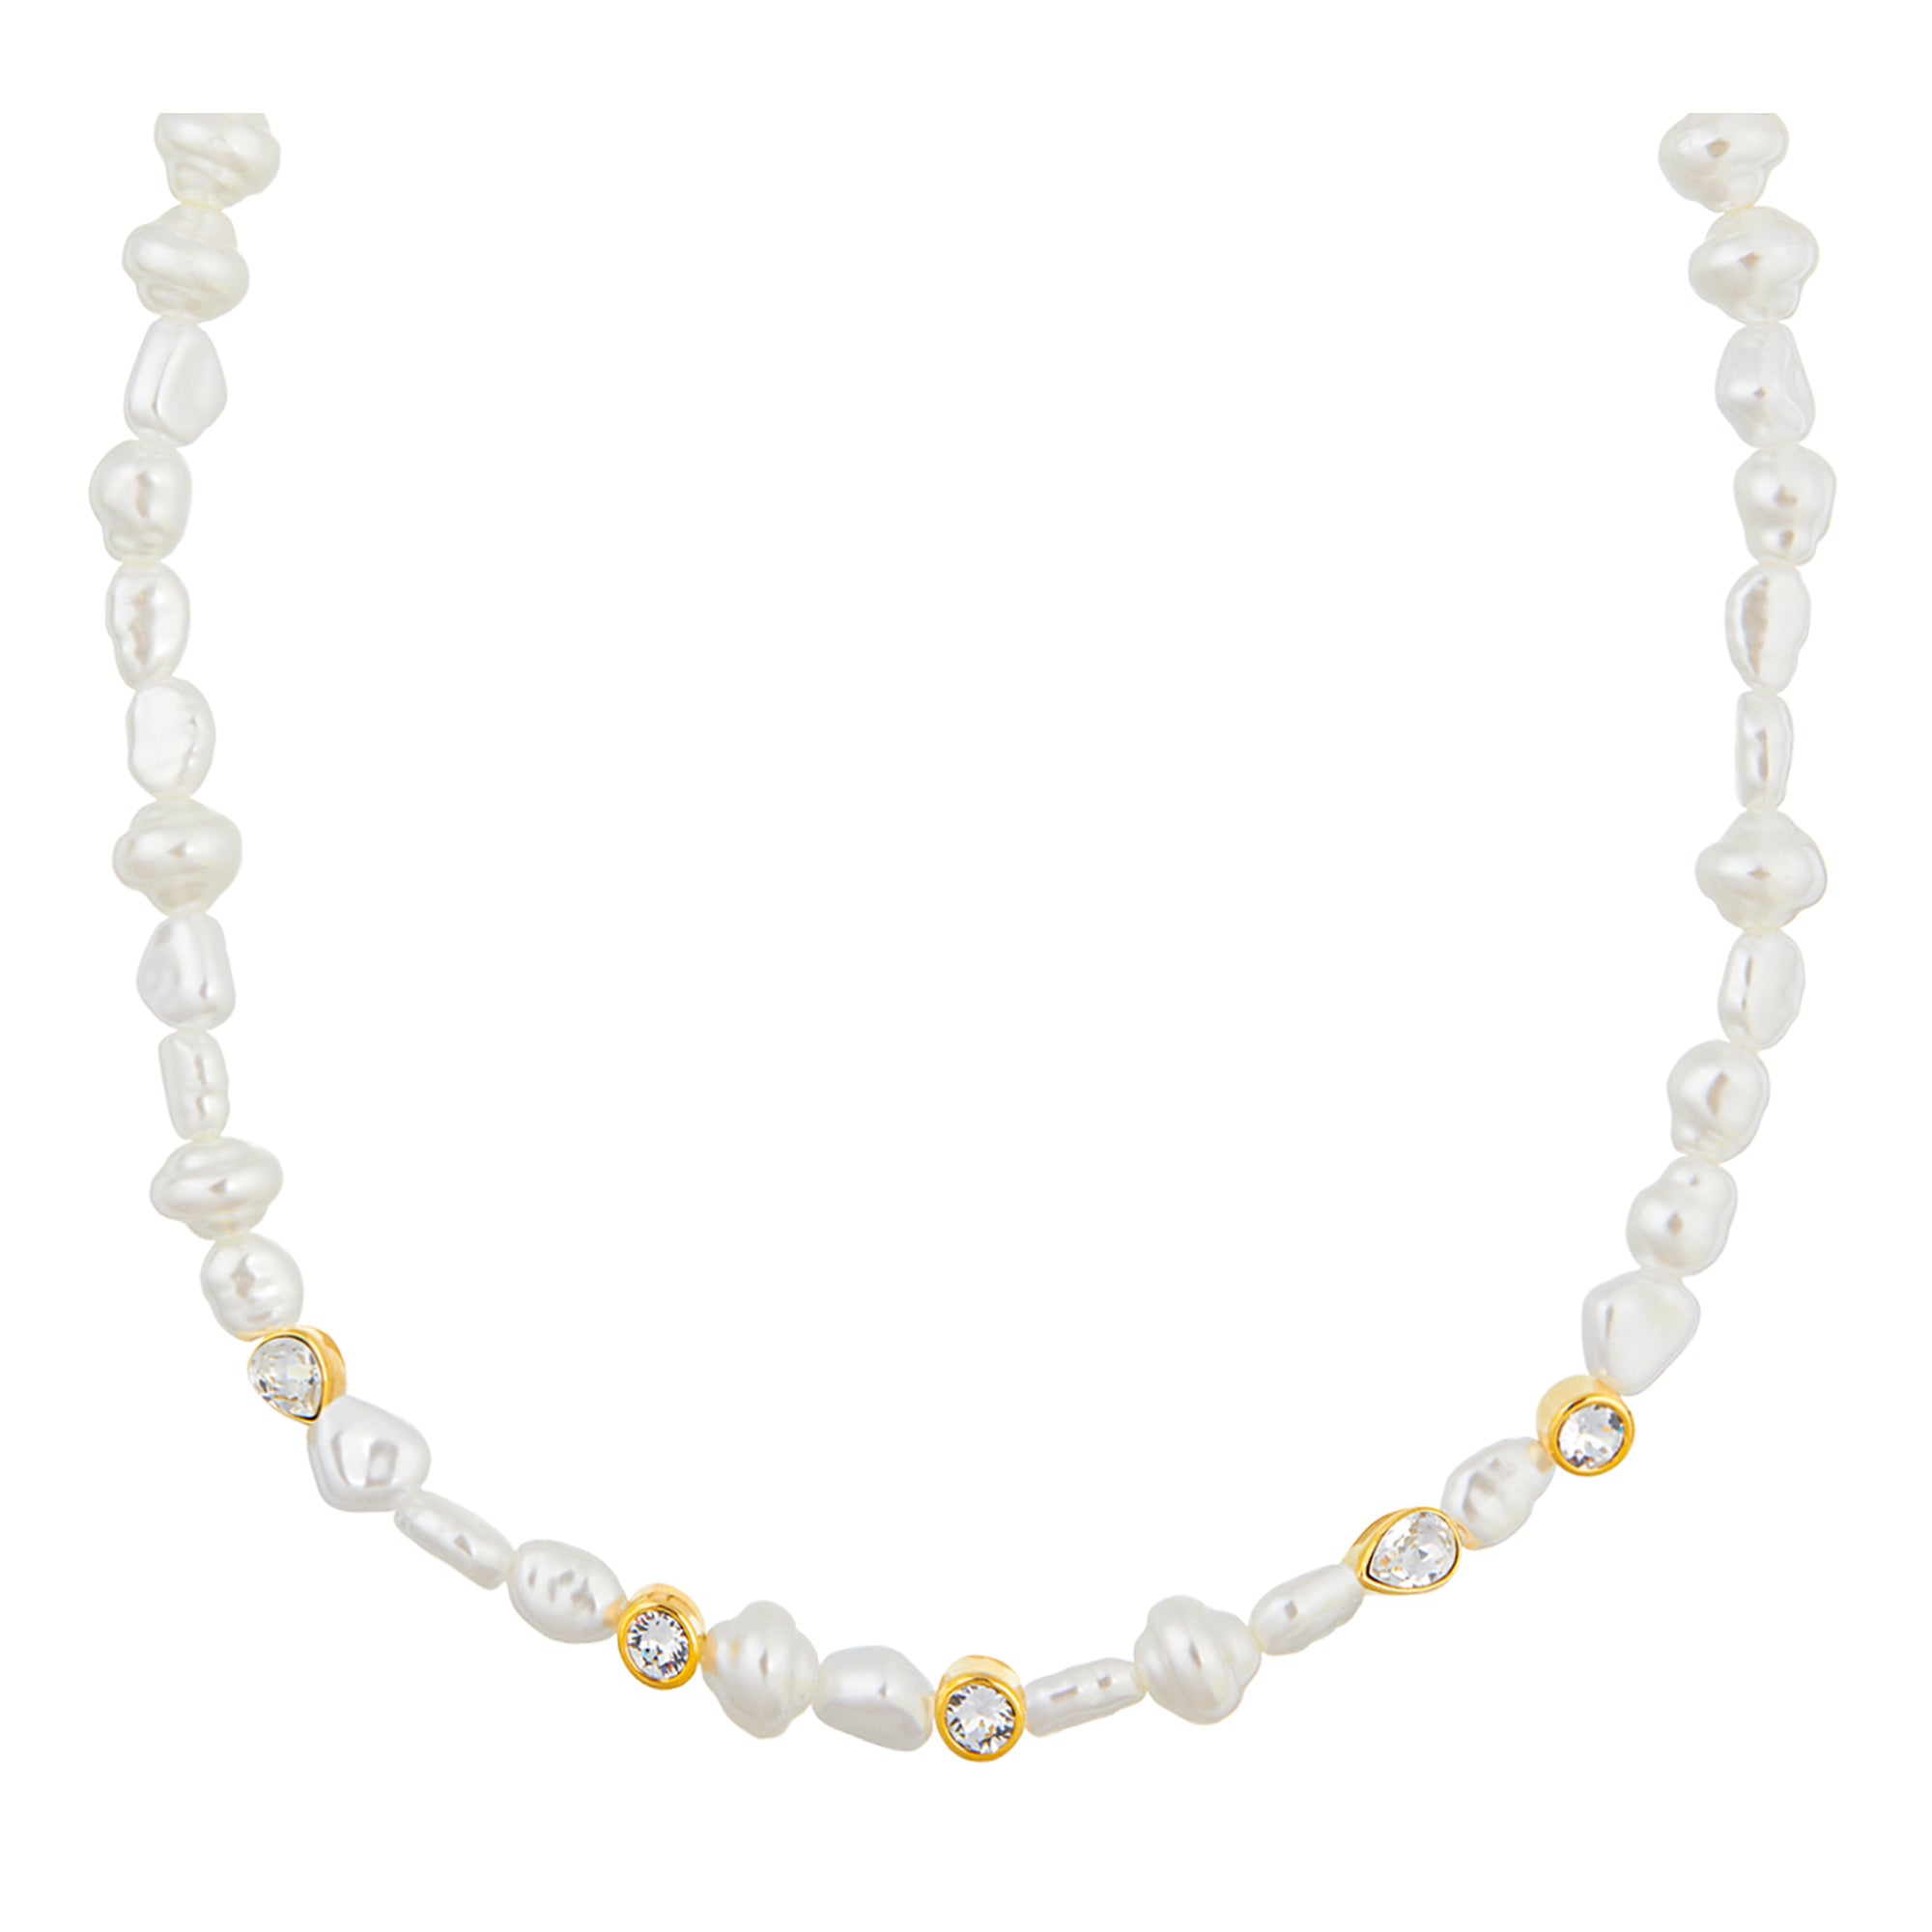 Mixed Crystal & Pearl Necklace Made With Swarovski Crystals - Orelia London